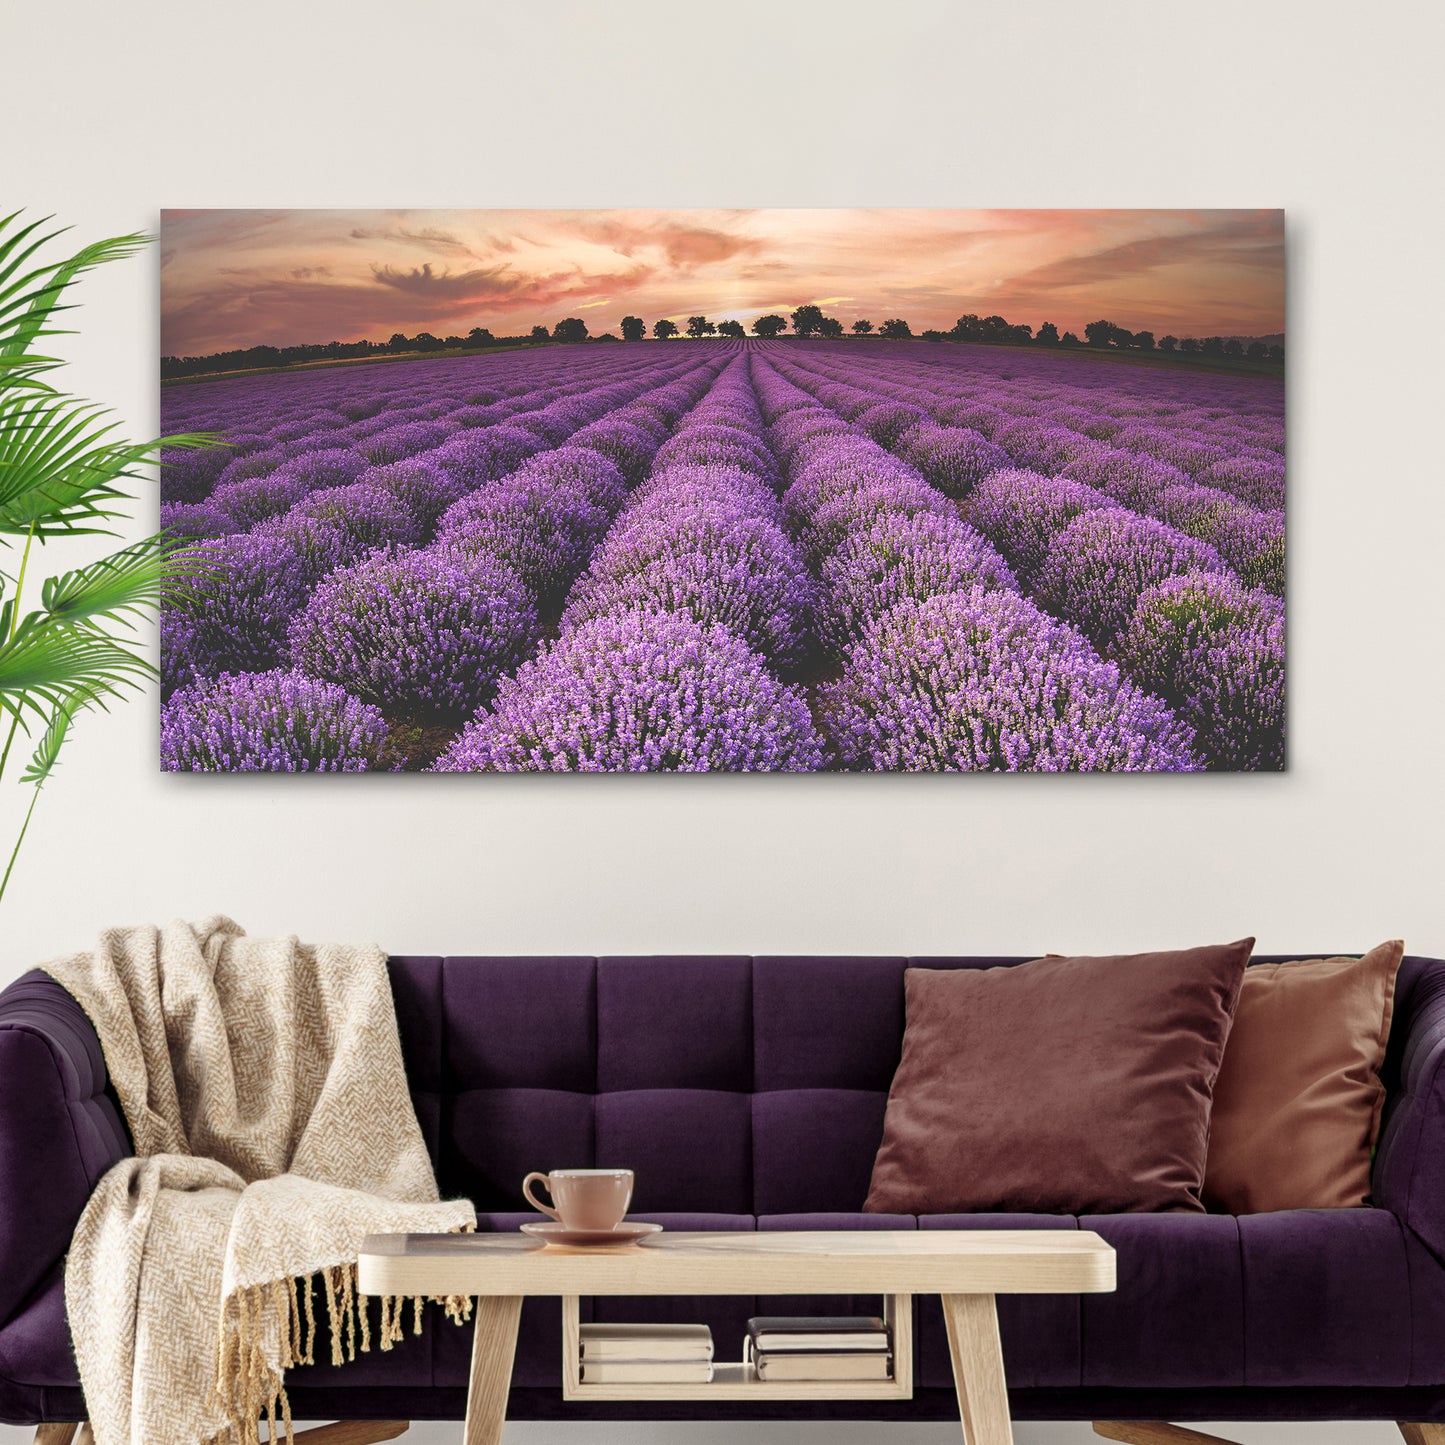 Lavender Field By The Sunset Canvas Wall Art Style 2 - Image by Tailored Canvases